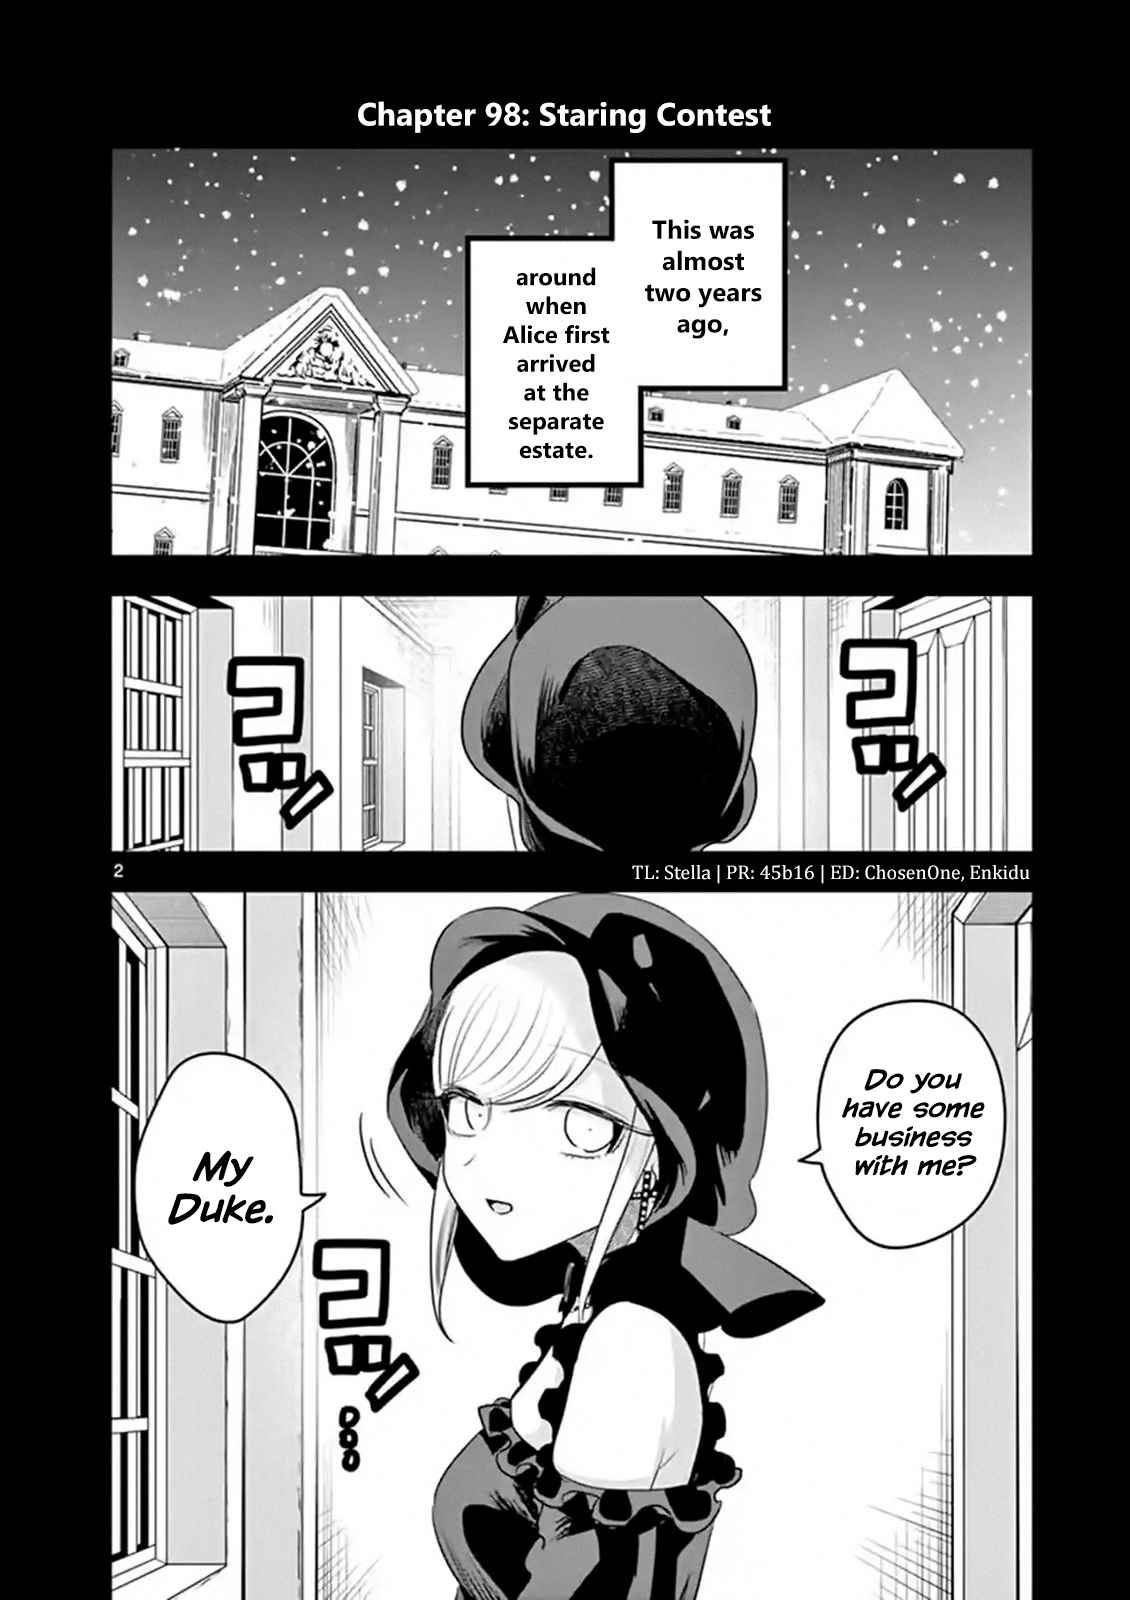 The Duke of Death and His Black Maid Vol. 7 Ch. 98 Staring Contest